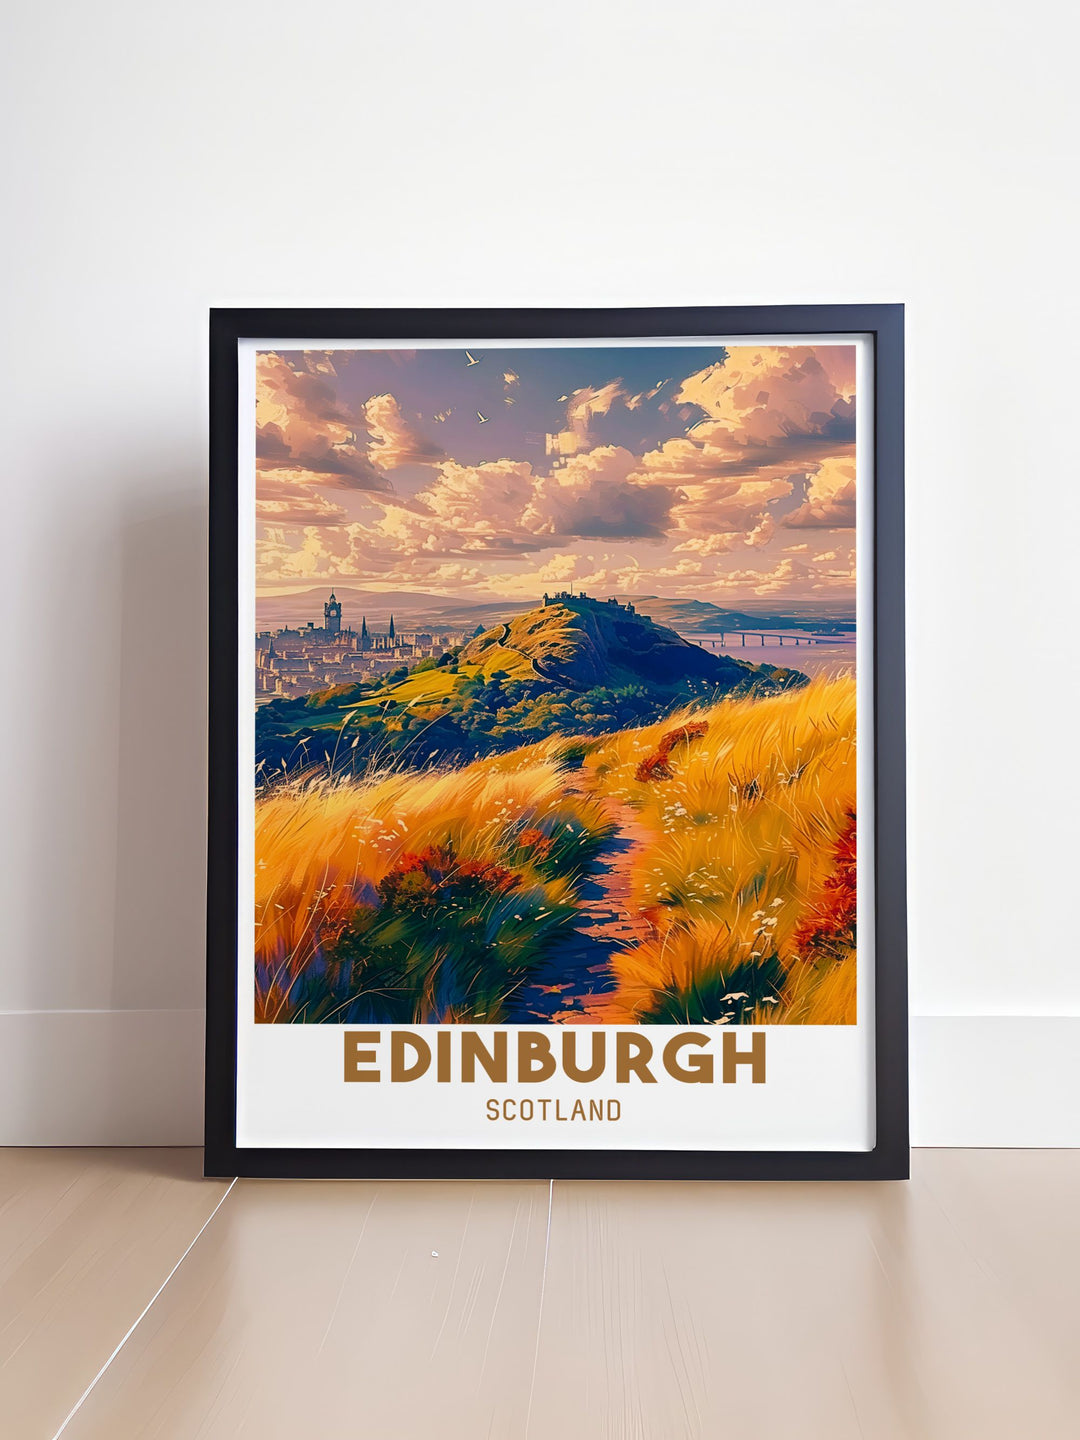 Vintage poster highlighting the historic charm of Edinburghs Royal Mile, showcasing the rich cultural heritage and scenic views of the city.